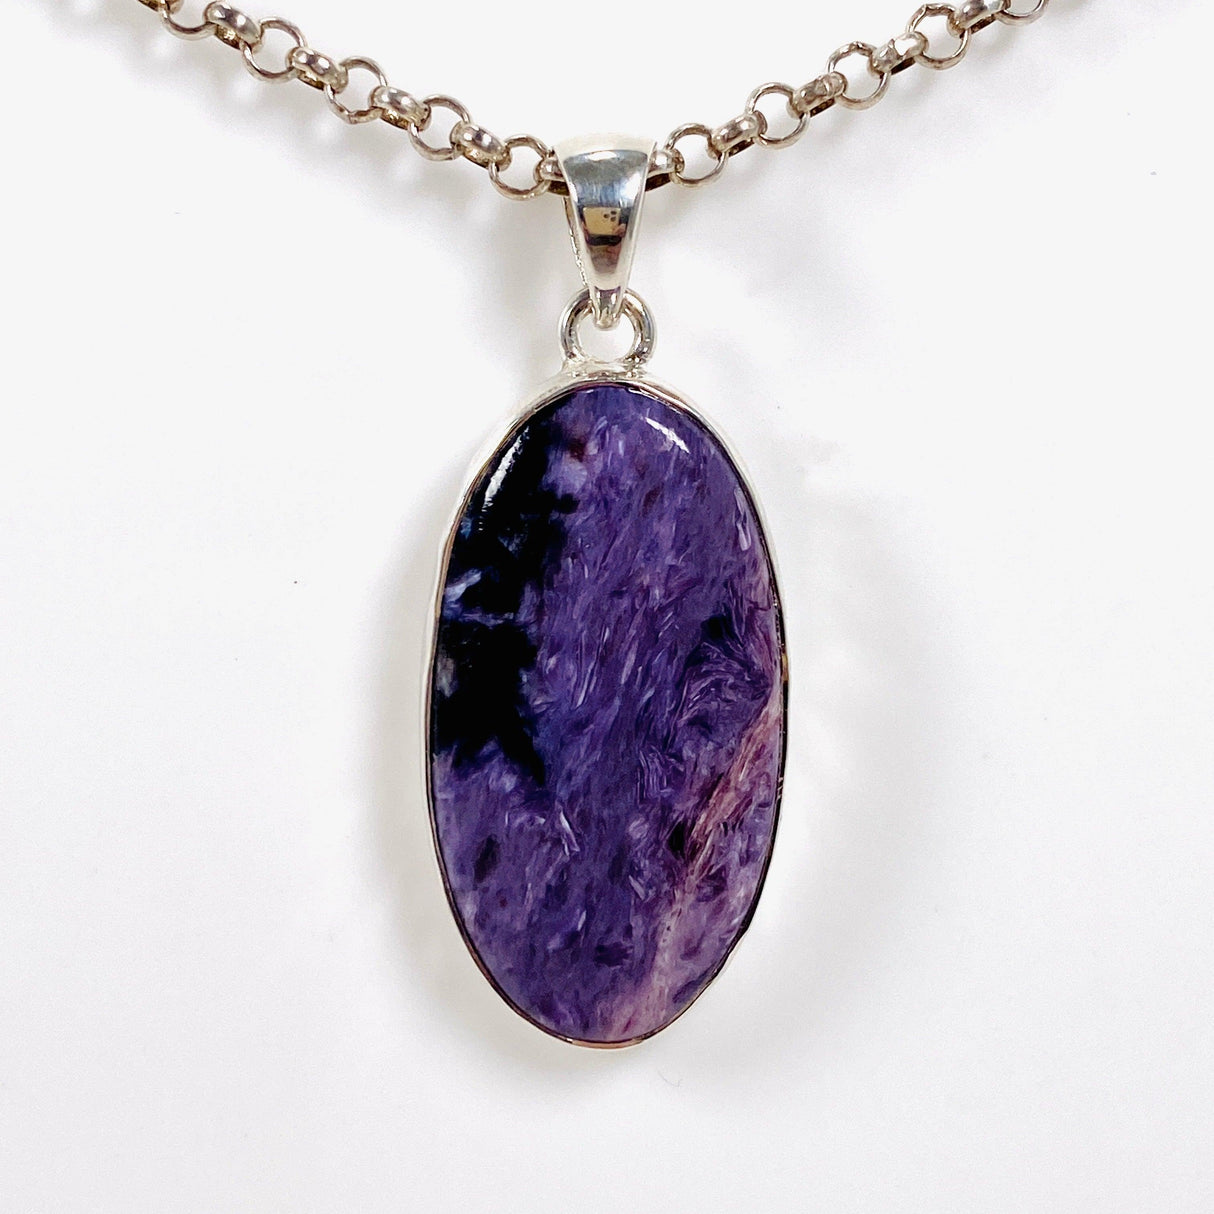 Purple Charoite oval pendant in sterling silver on a chain